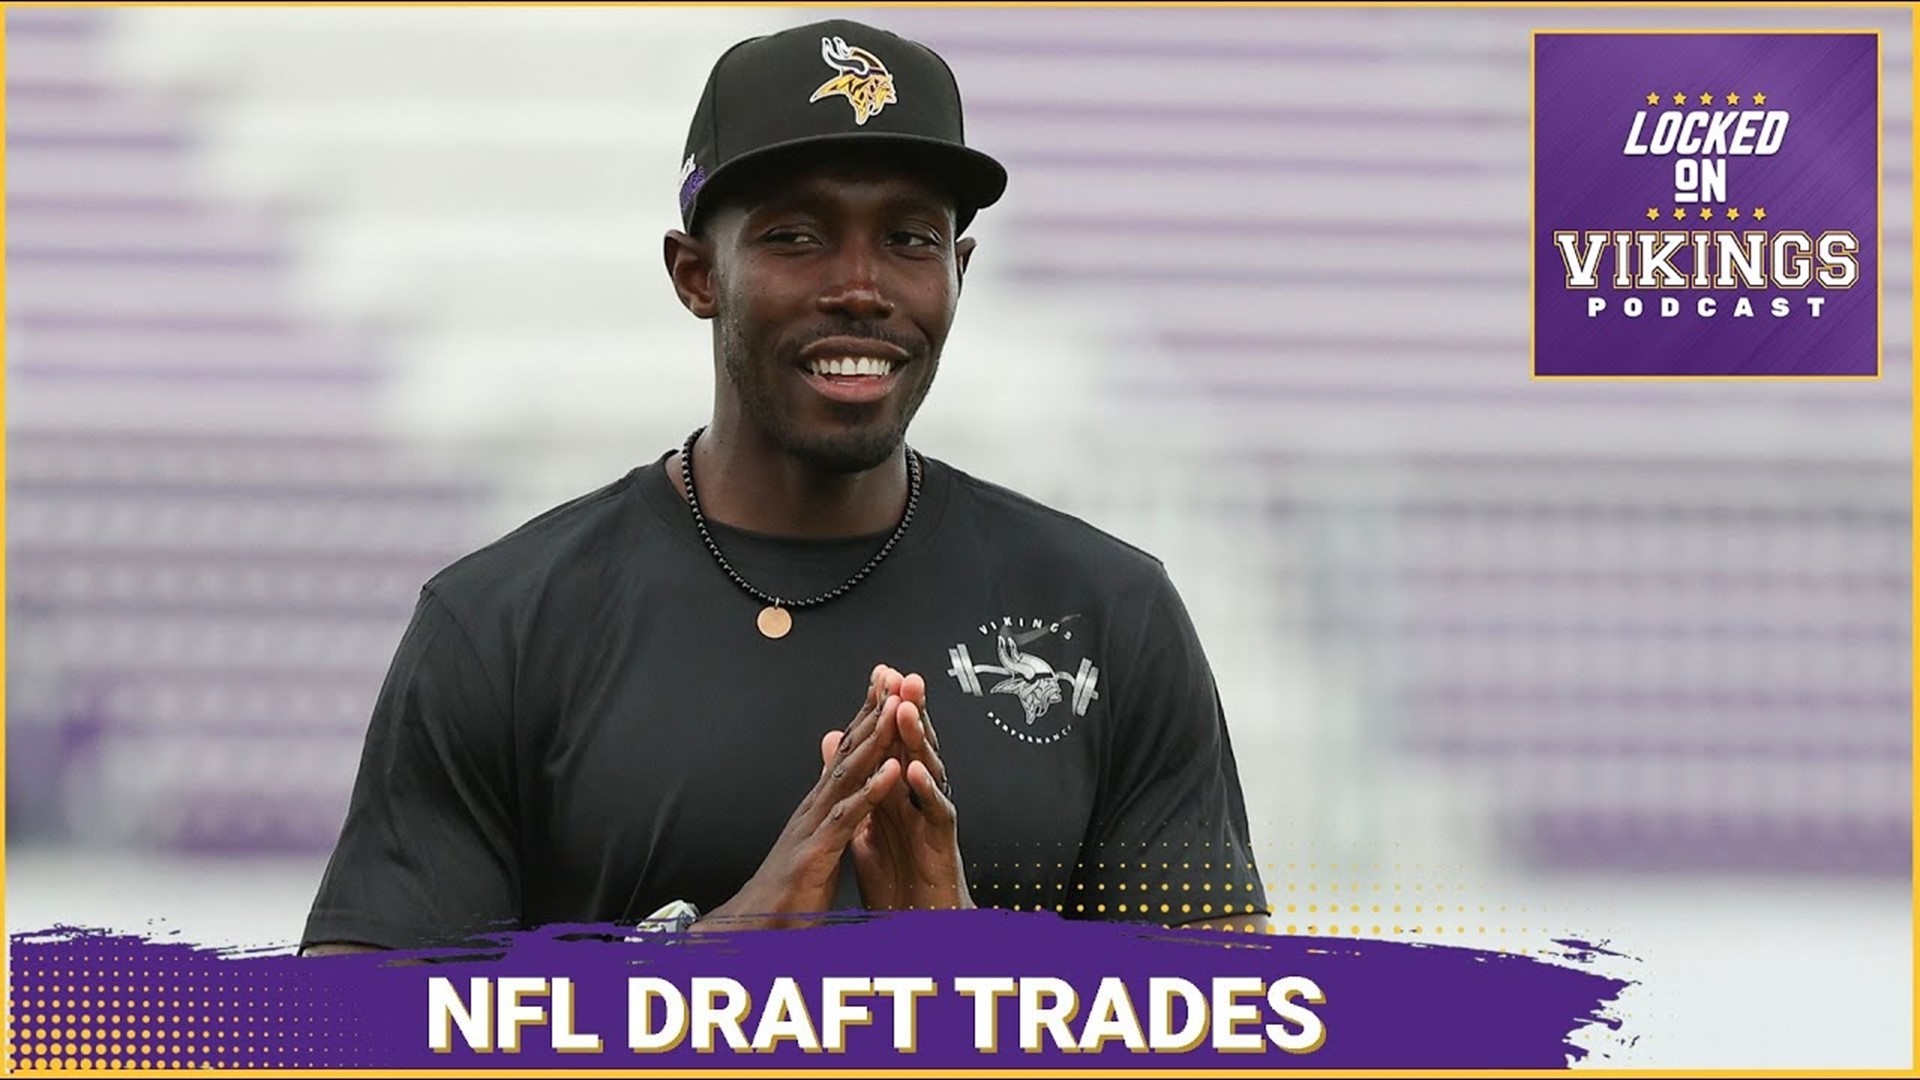 How NFL Draft Trades Work